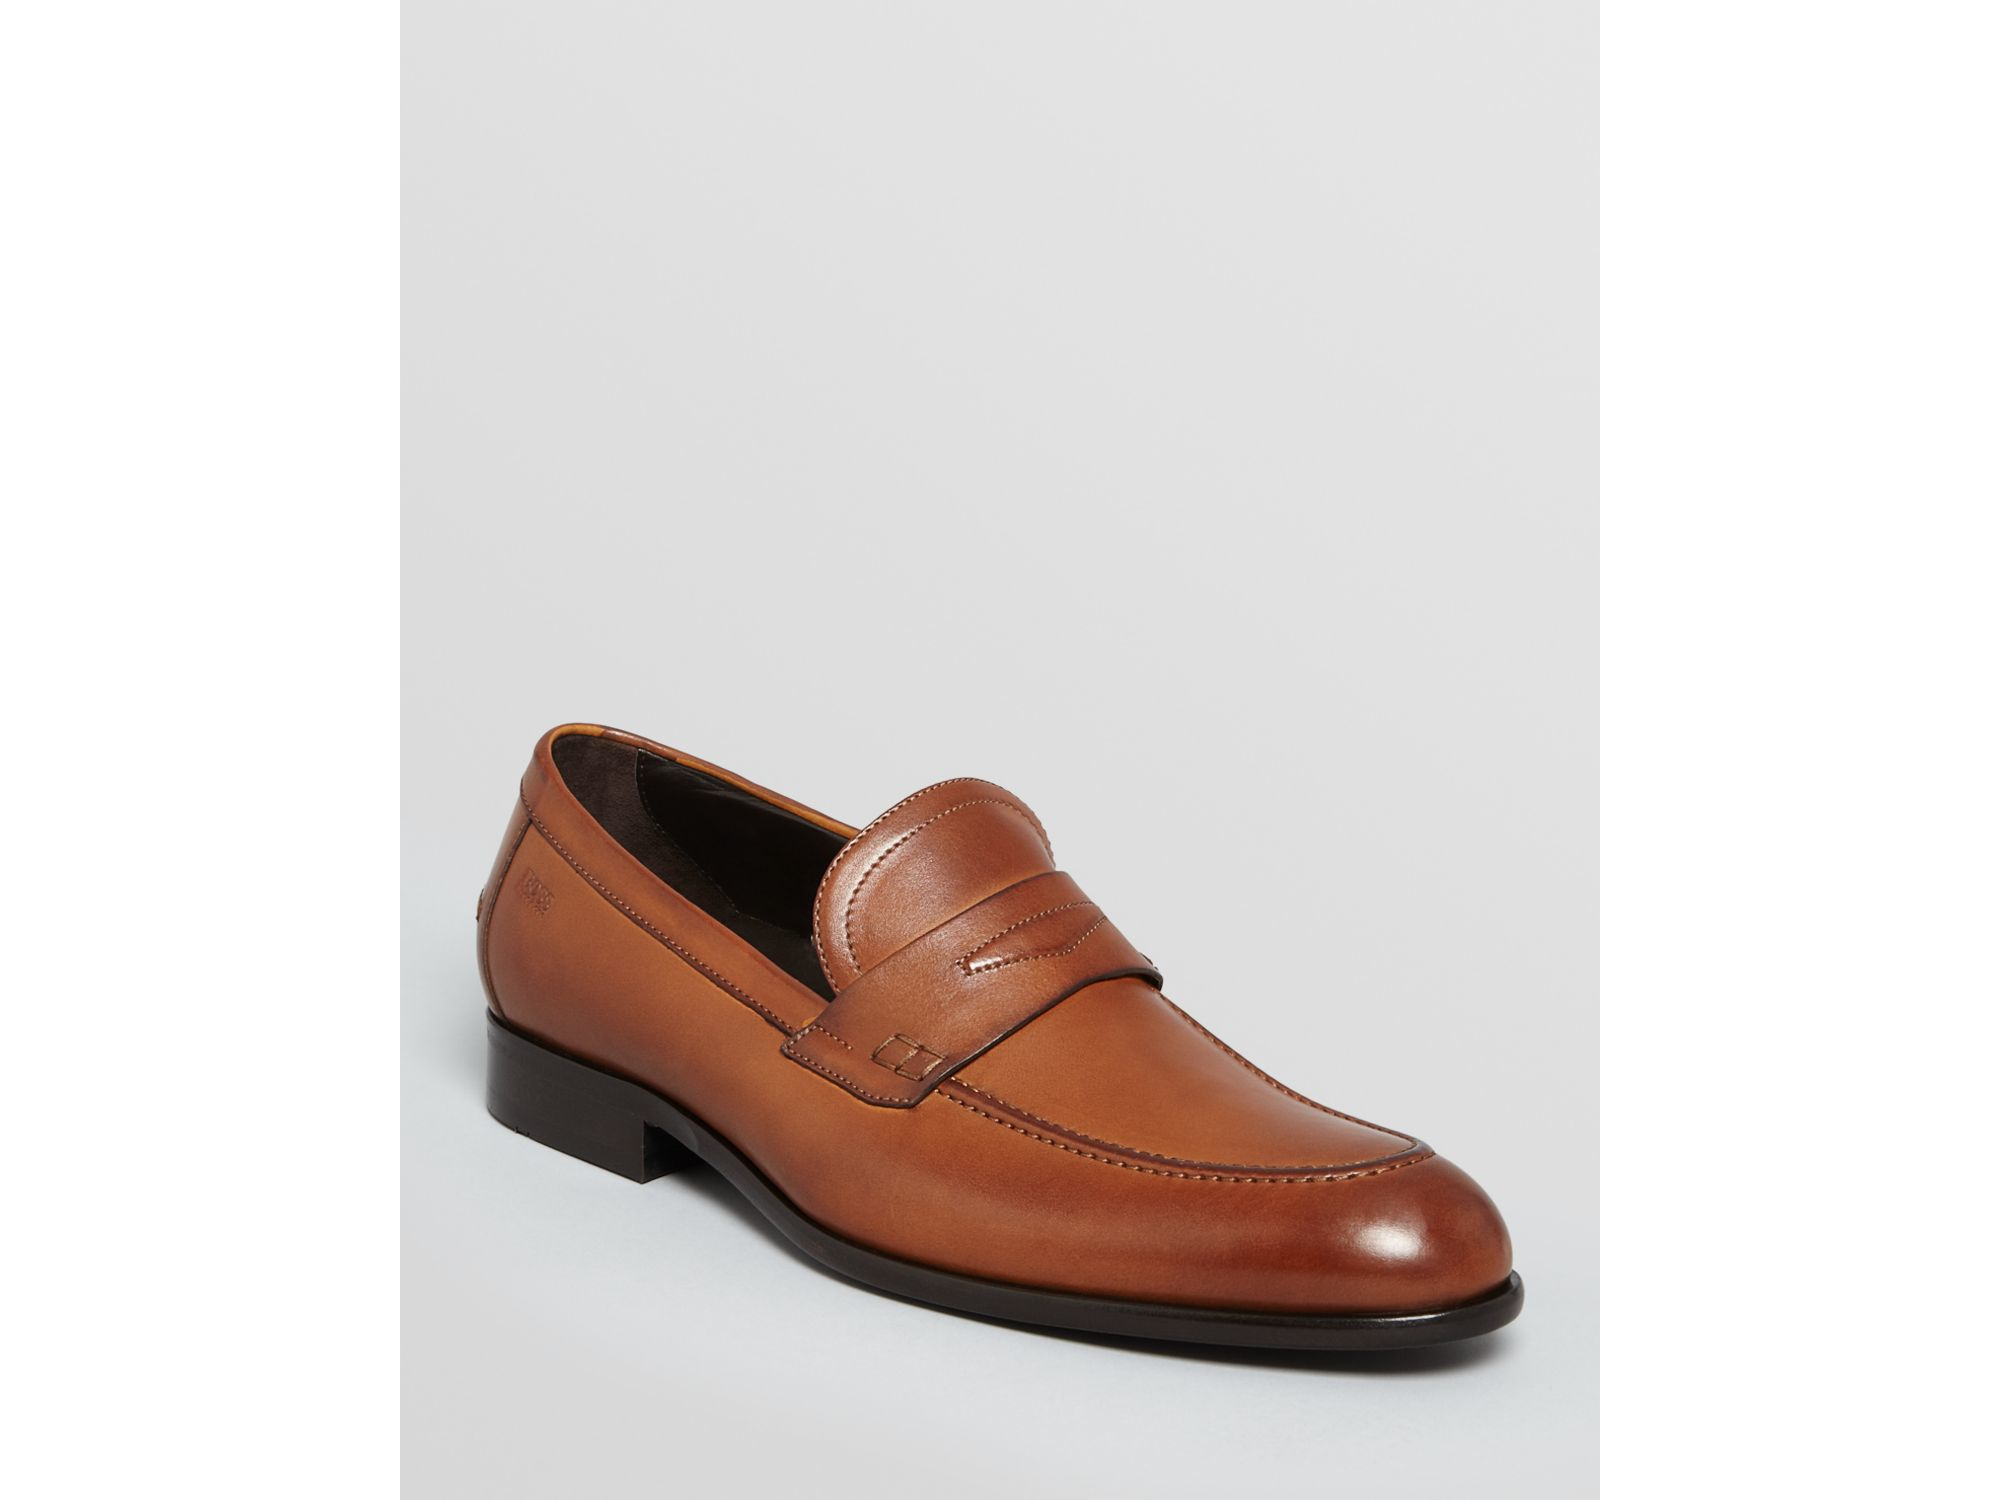 Boss Penny Loafer Shop, SAVE 60%.